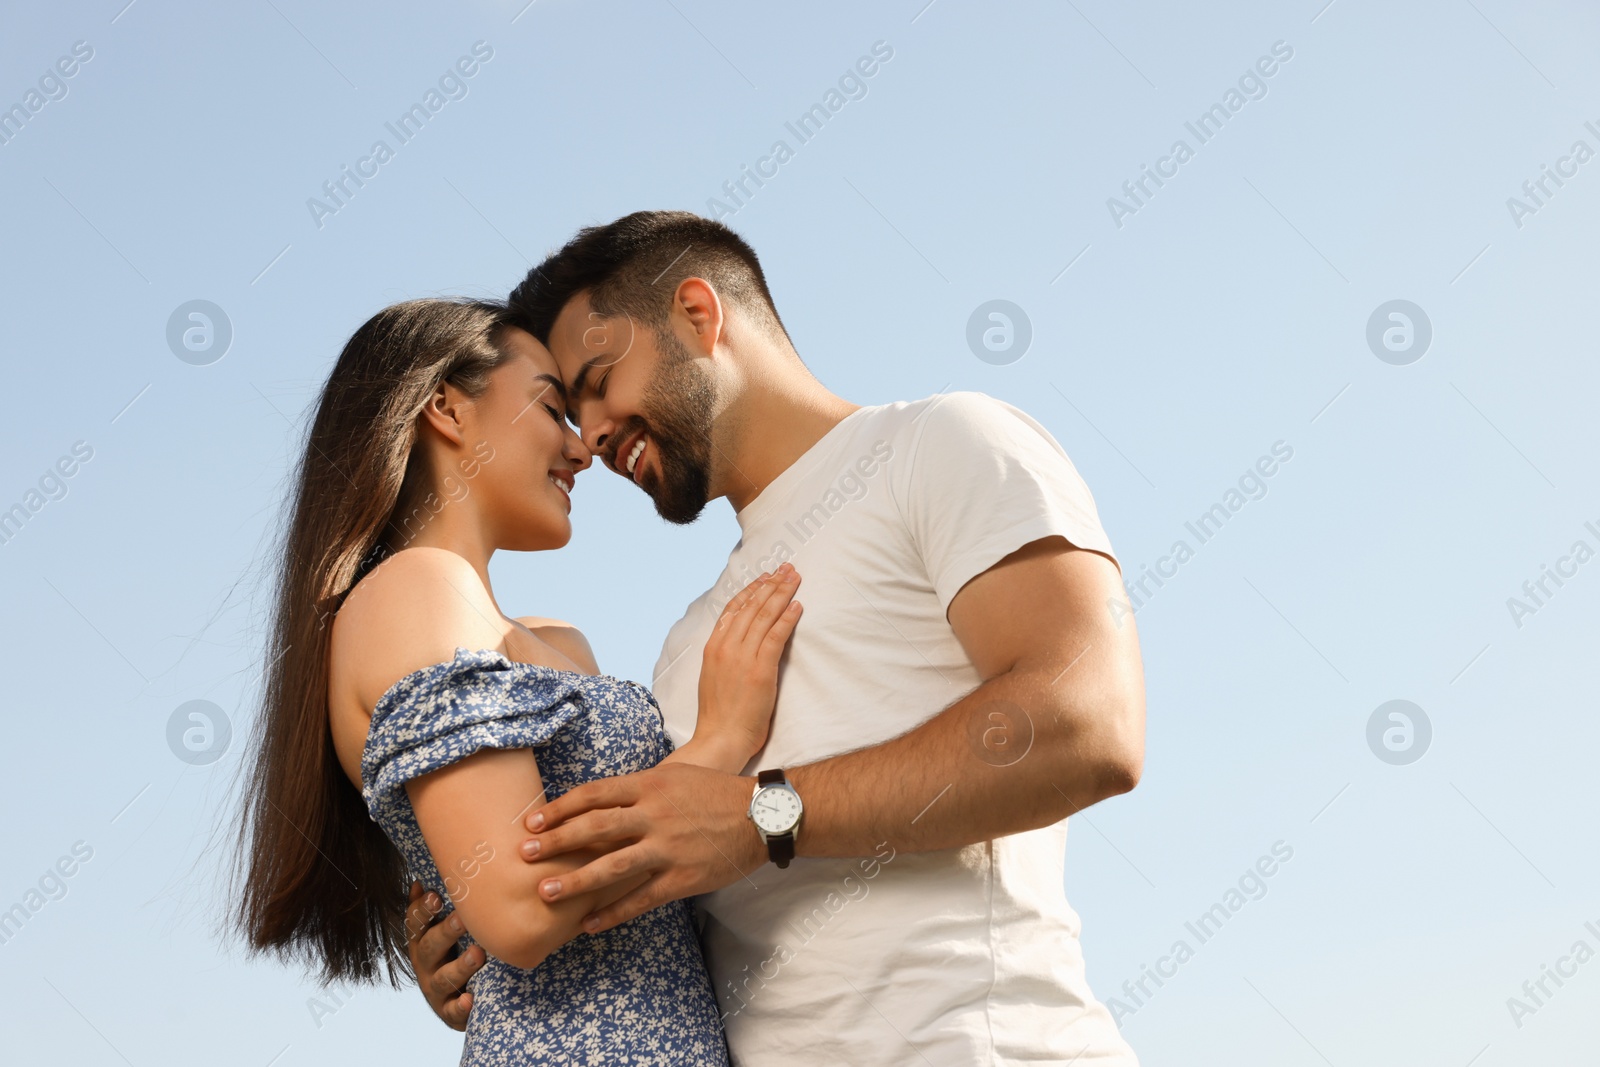 Photo of Romantic date. Beautiful couple spending time together against blue sky, low angle view with space for text